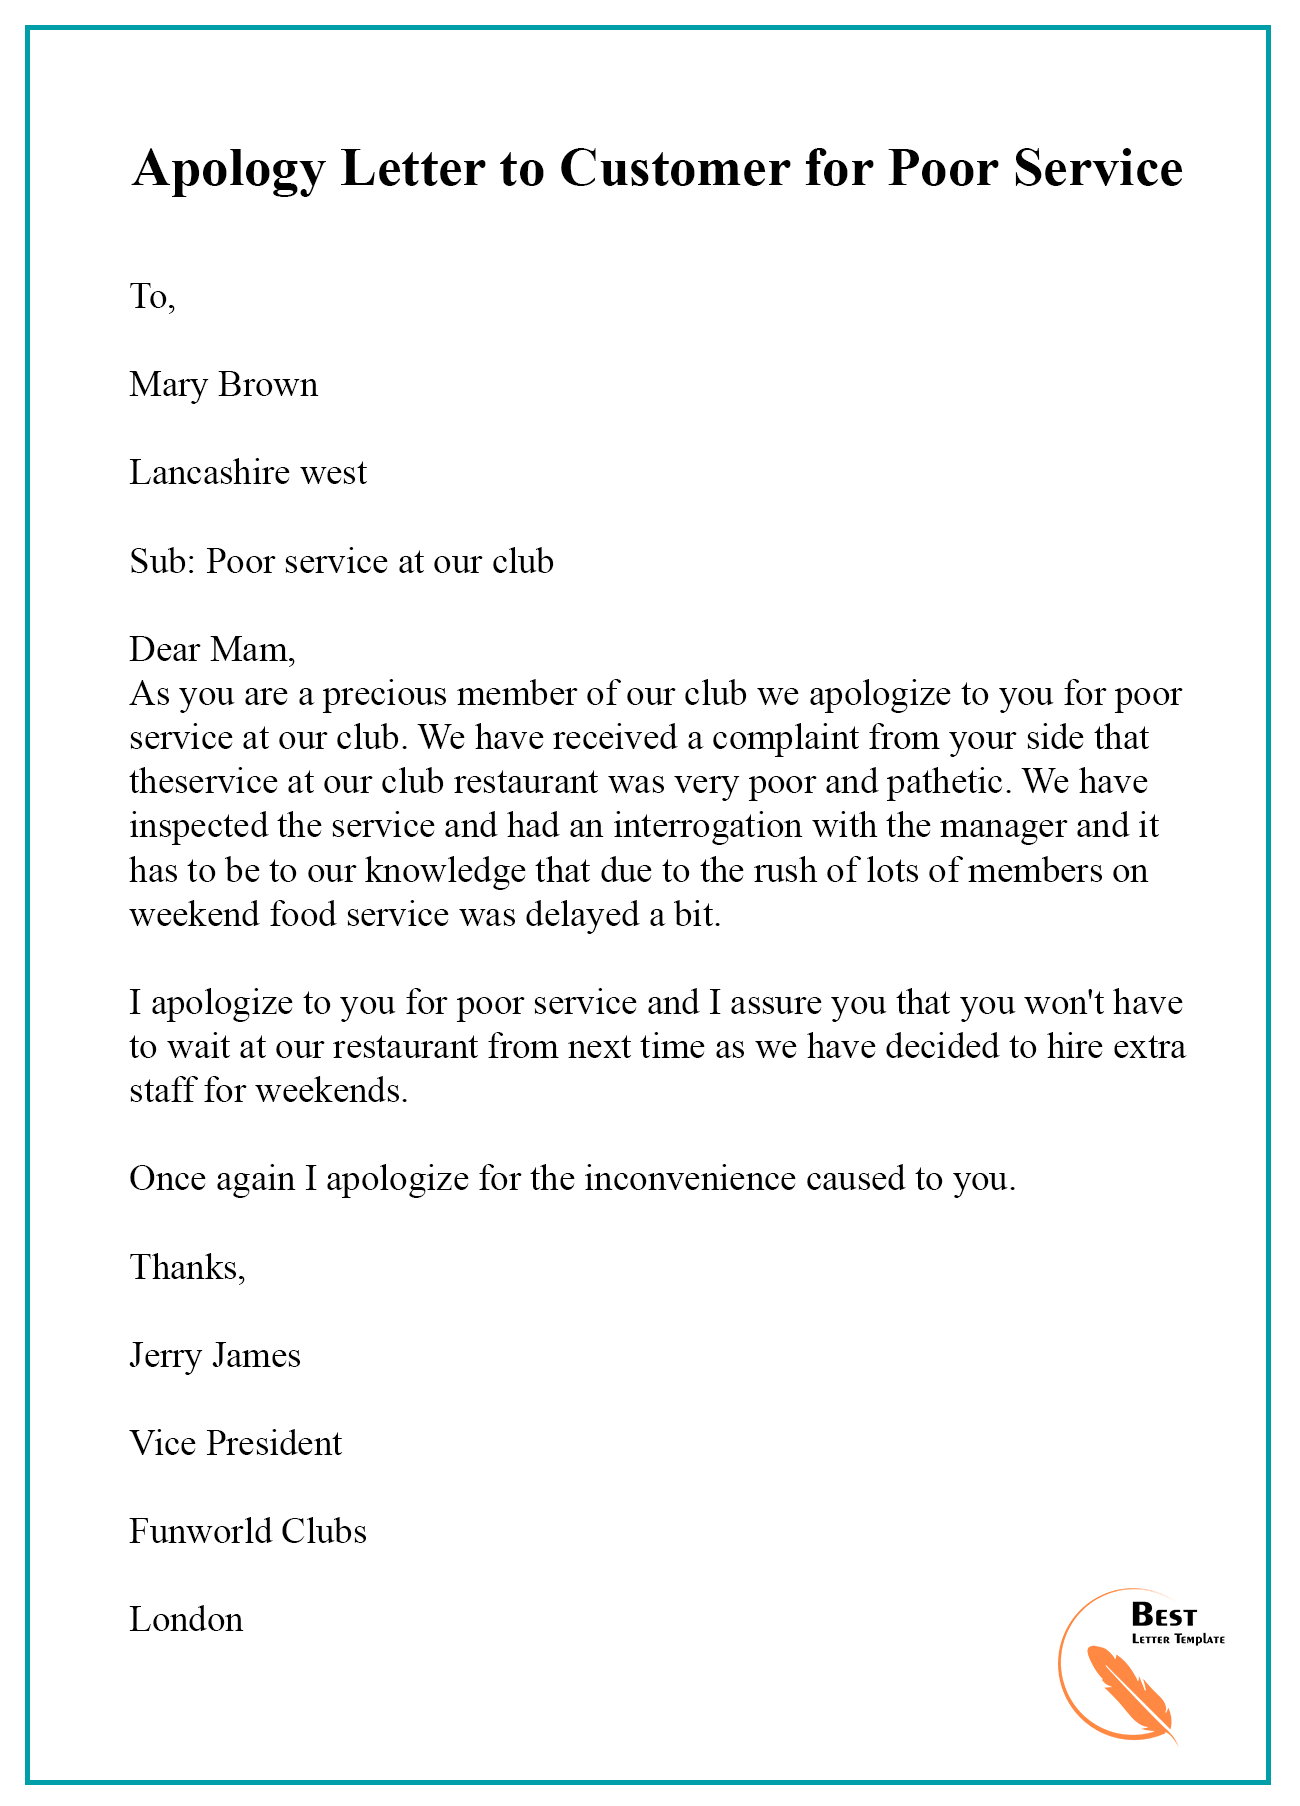 Apology Letter Template to Customer Format, Sample & Example